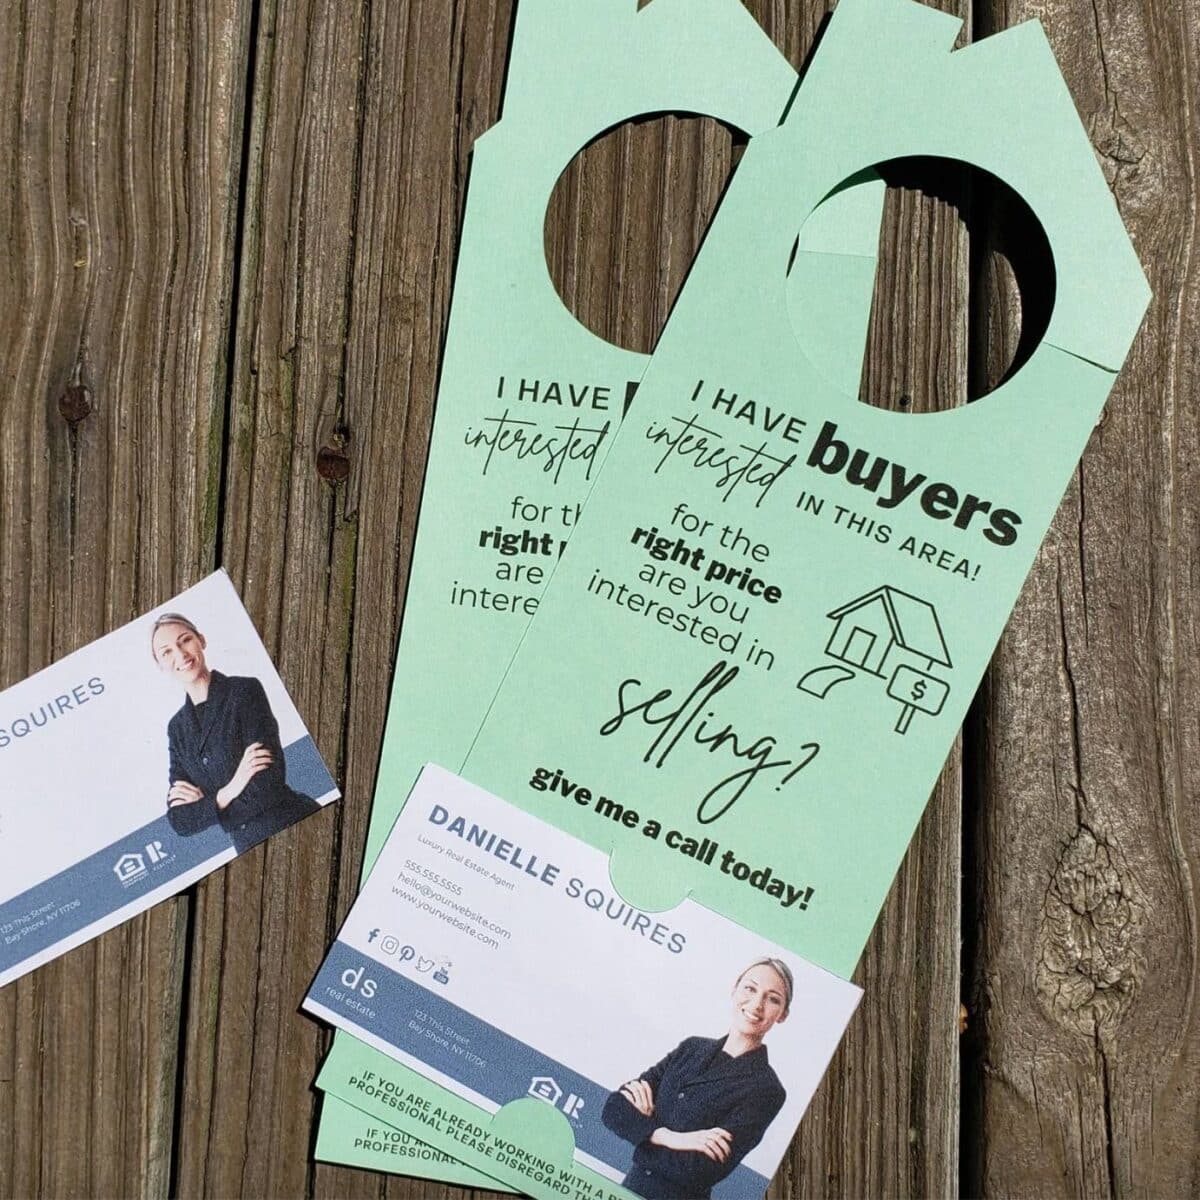 Green door hangers with "I have buyers interested in this area" printed on the front with a slot for a business card at the bottom.